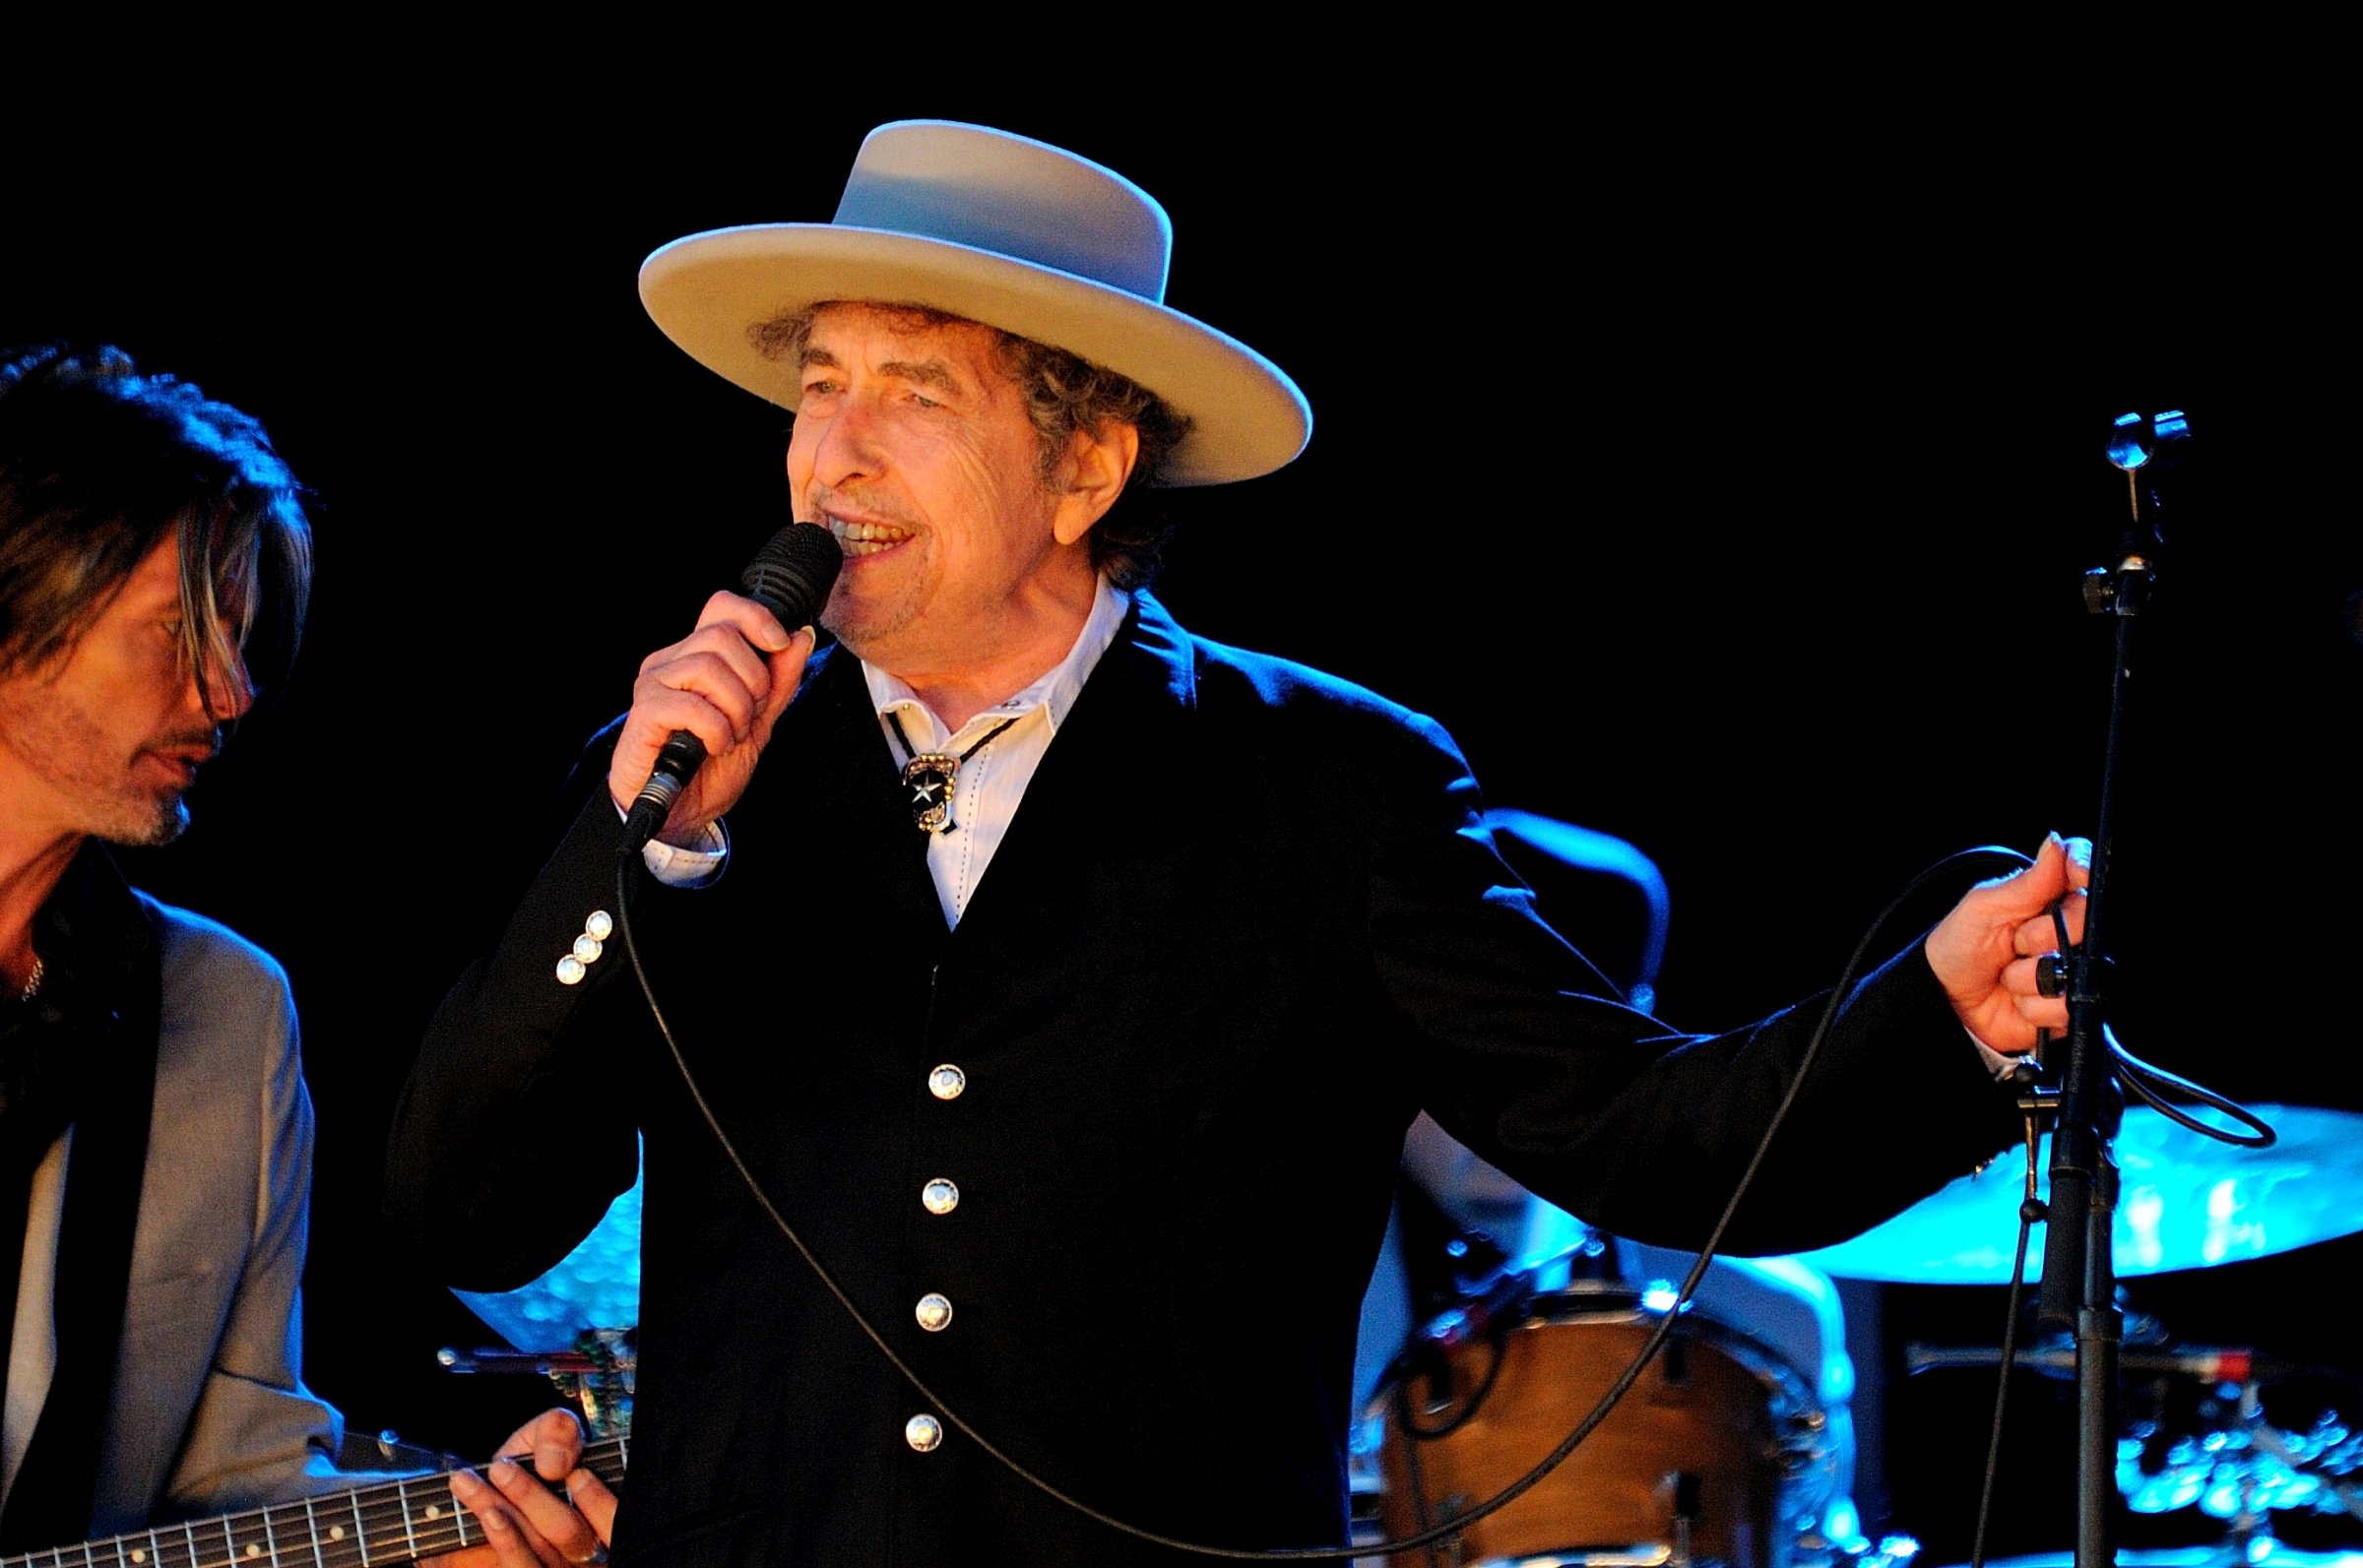 Bob Dylan performs on stage during Hop Farm Festival on June 30, 2012 in Paddock Wood, United Kingdom.